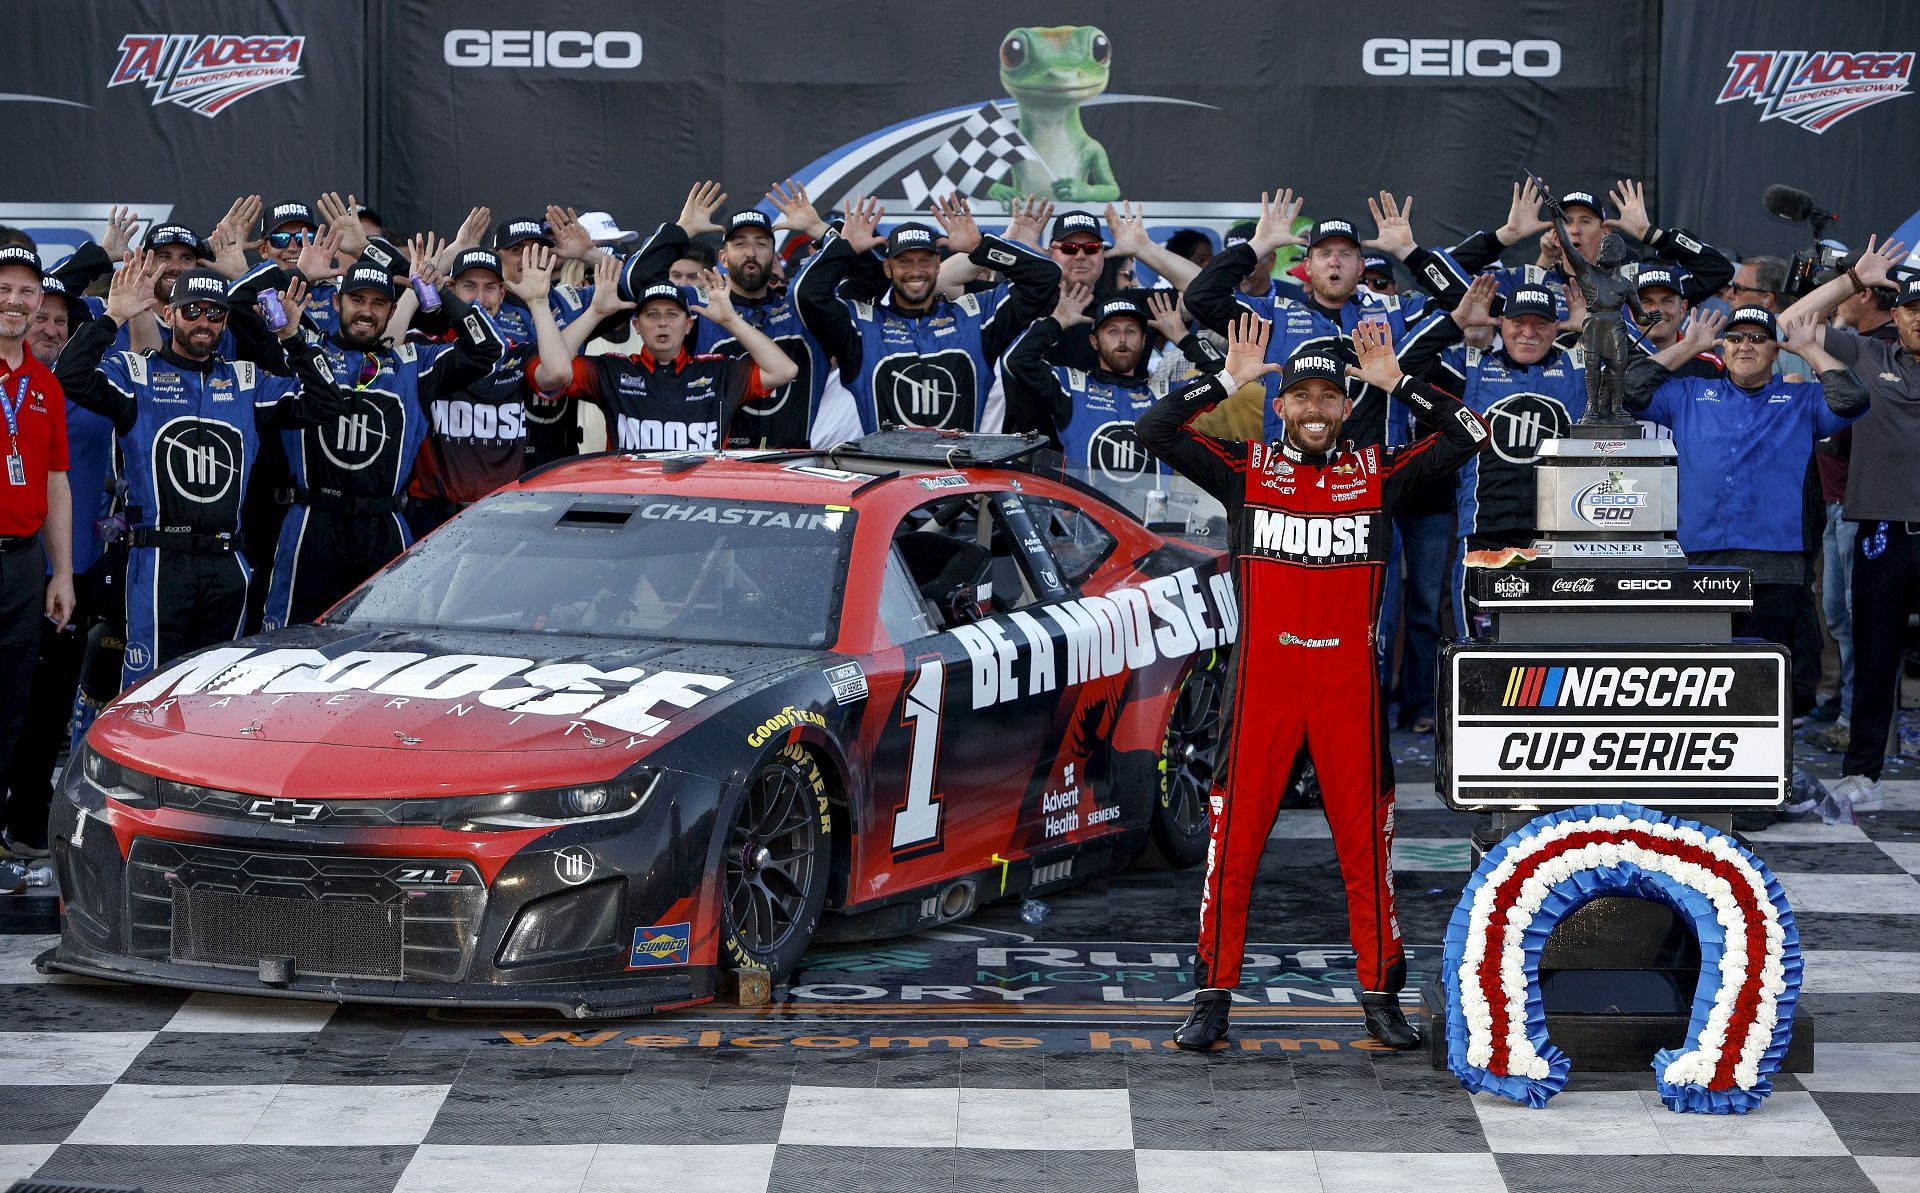 Ross Chastain celebrate in victory lane after winning the NASCAR Cup Series GEICO 500 at Talladega Superspeedway. (Photo by Sean Gardner/Getty Images)